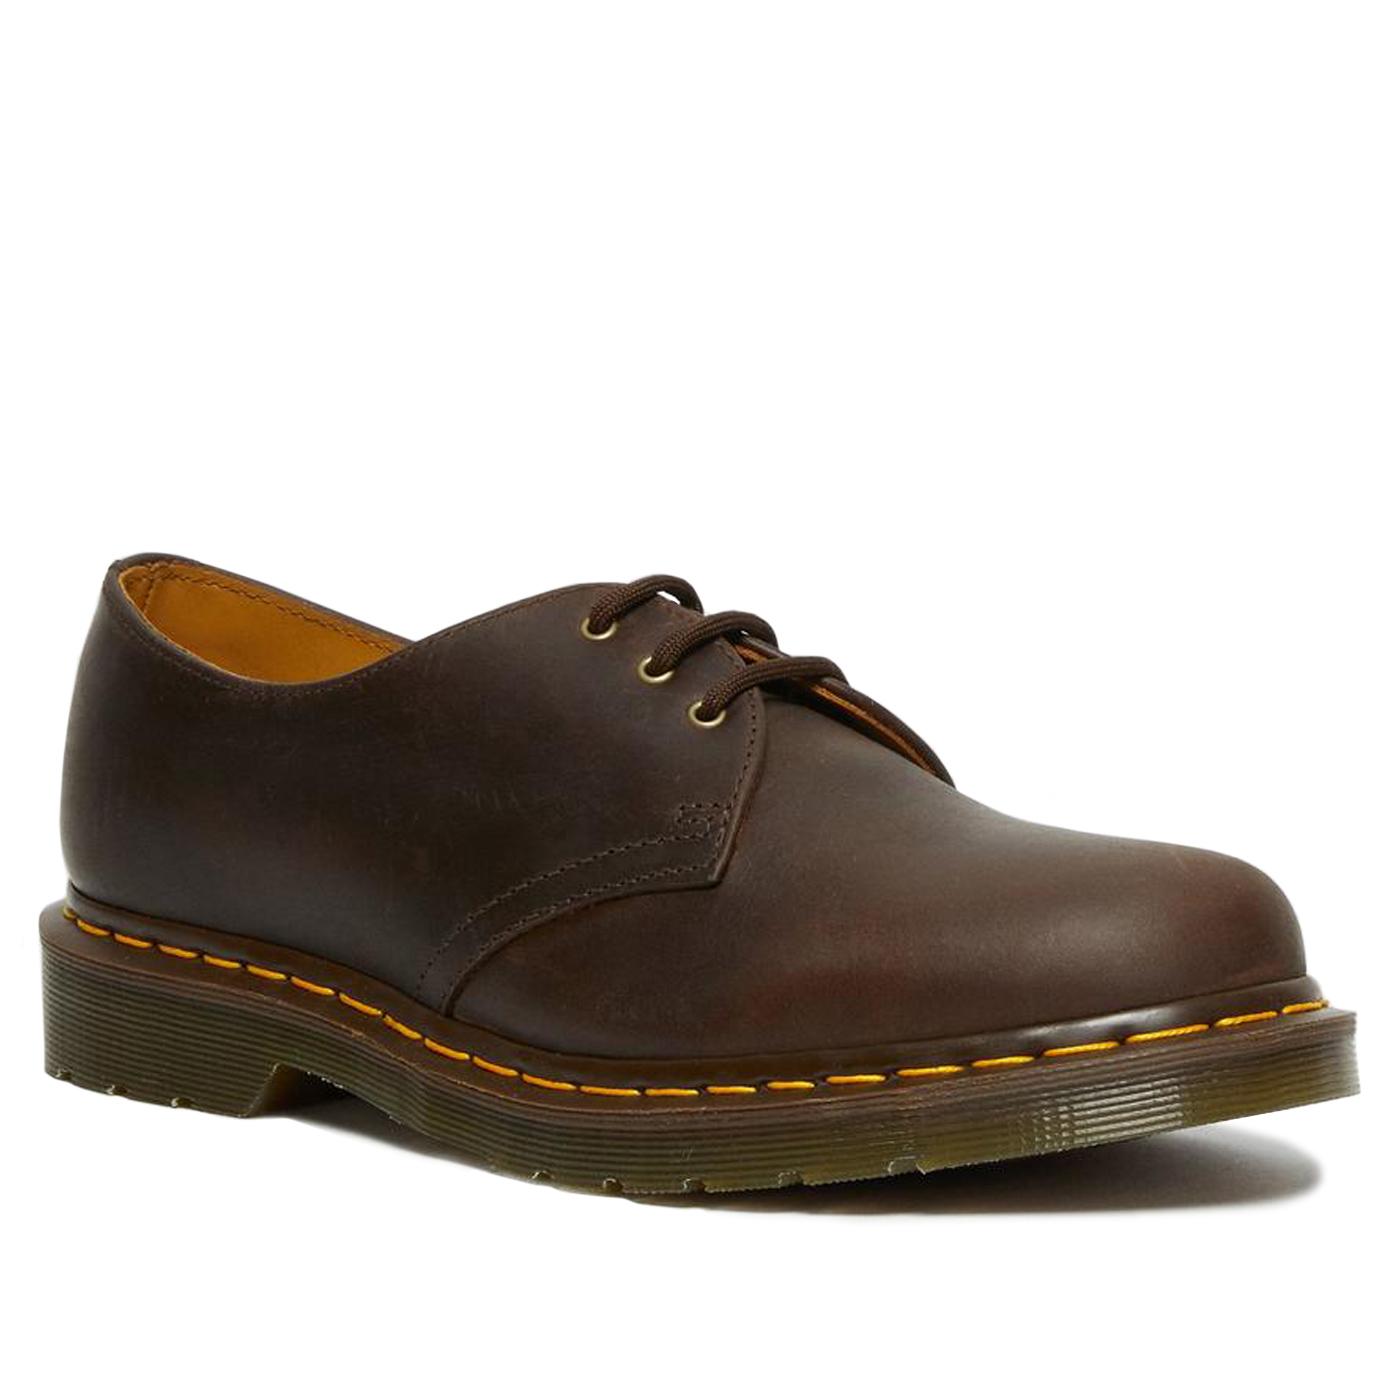 DR MARTENS '1461 Gaucho' Leather Oxford Shoes in Brown